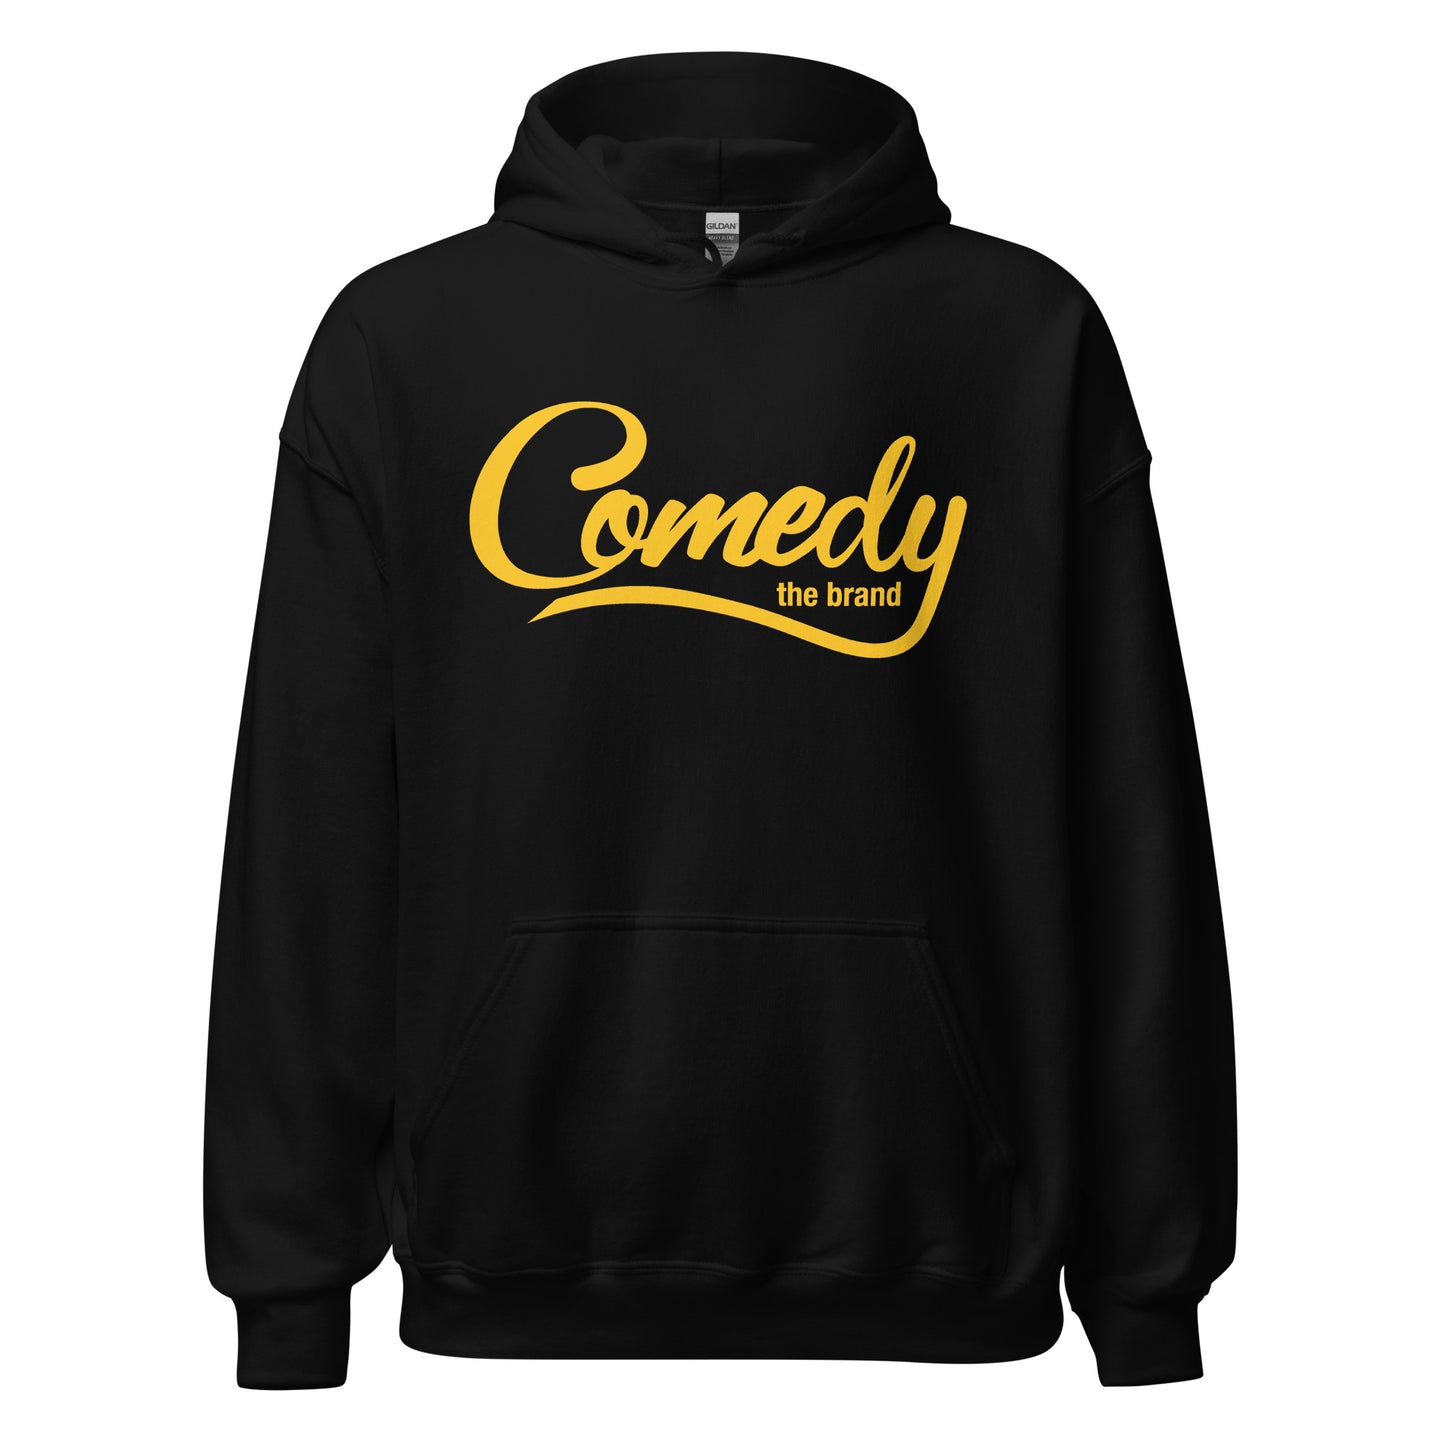 A Terrible Unisex Hoodie - Comedy the Brand - Comedy Fan Gear